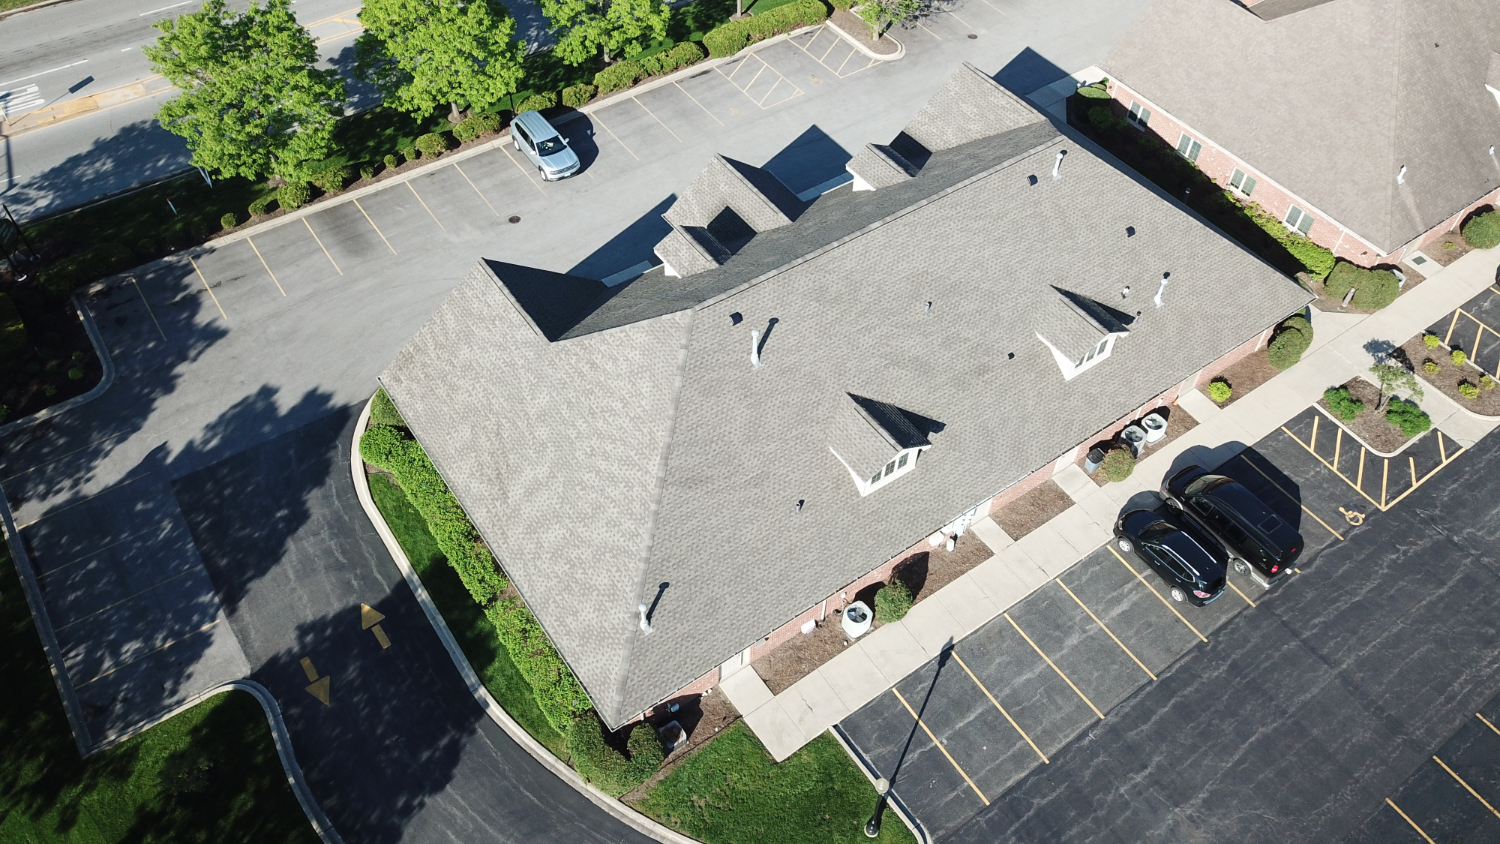 Matthews Roofing Professional Building Shingle Roofing Project